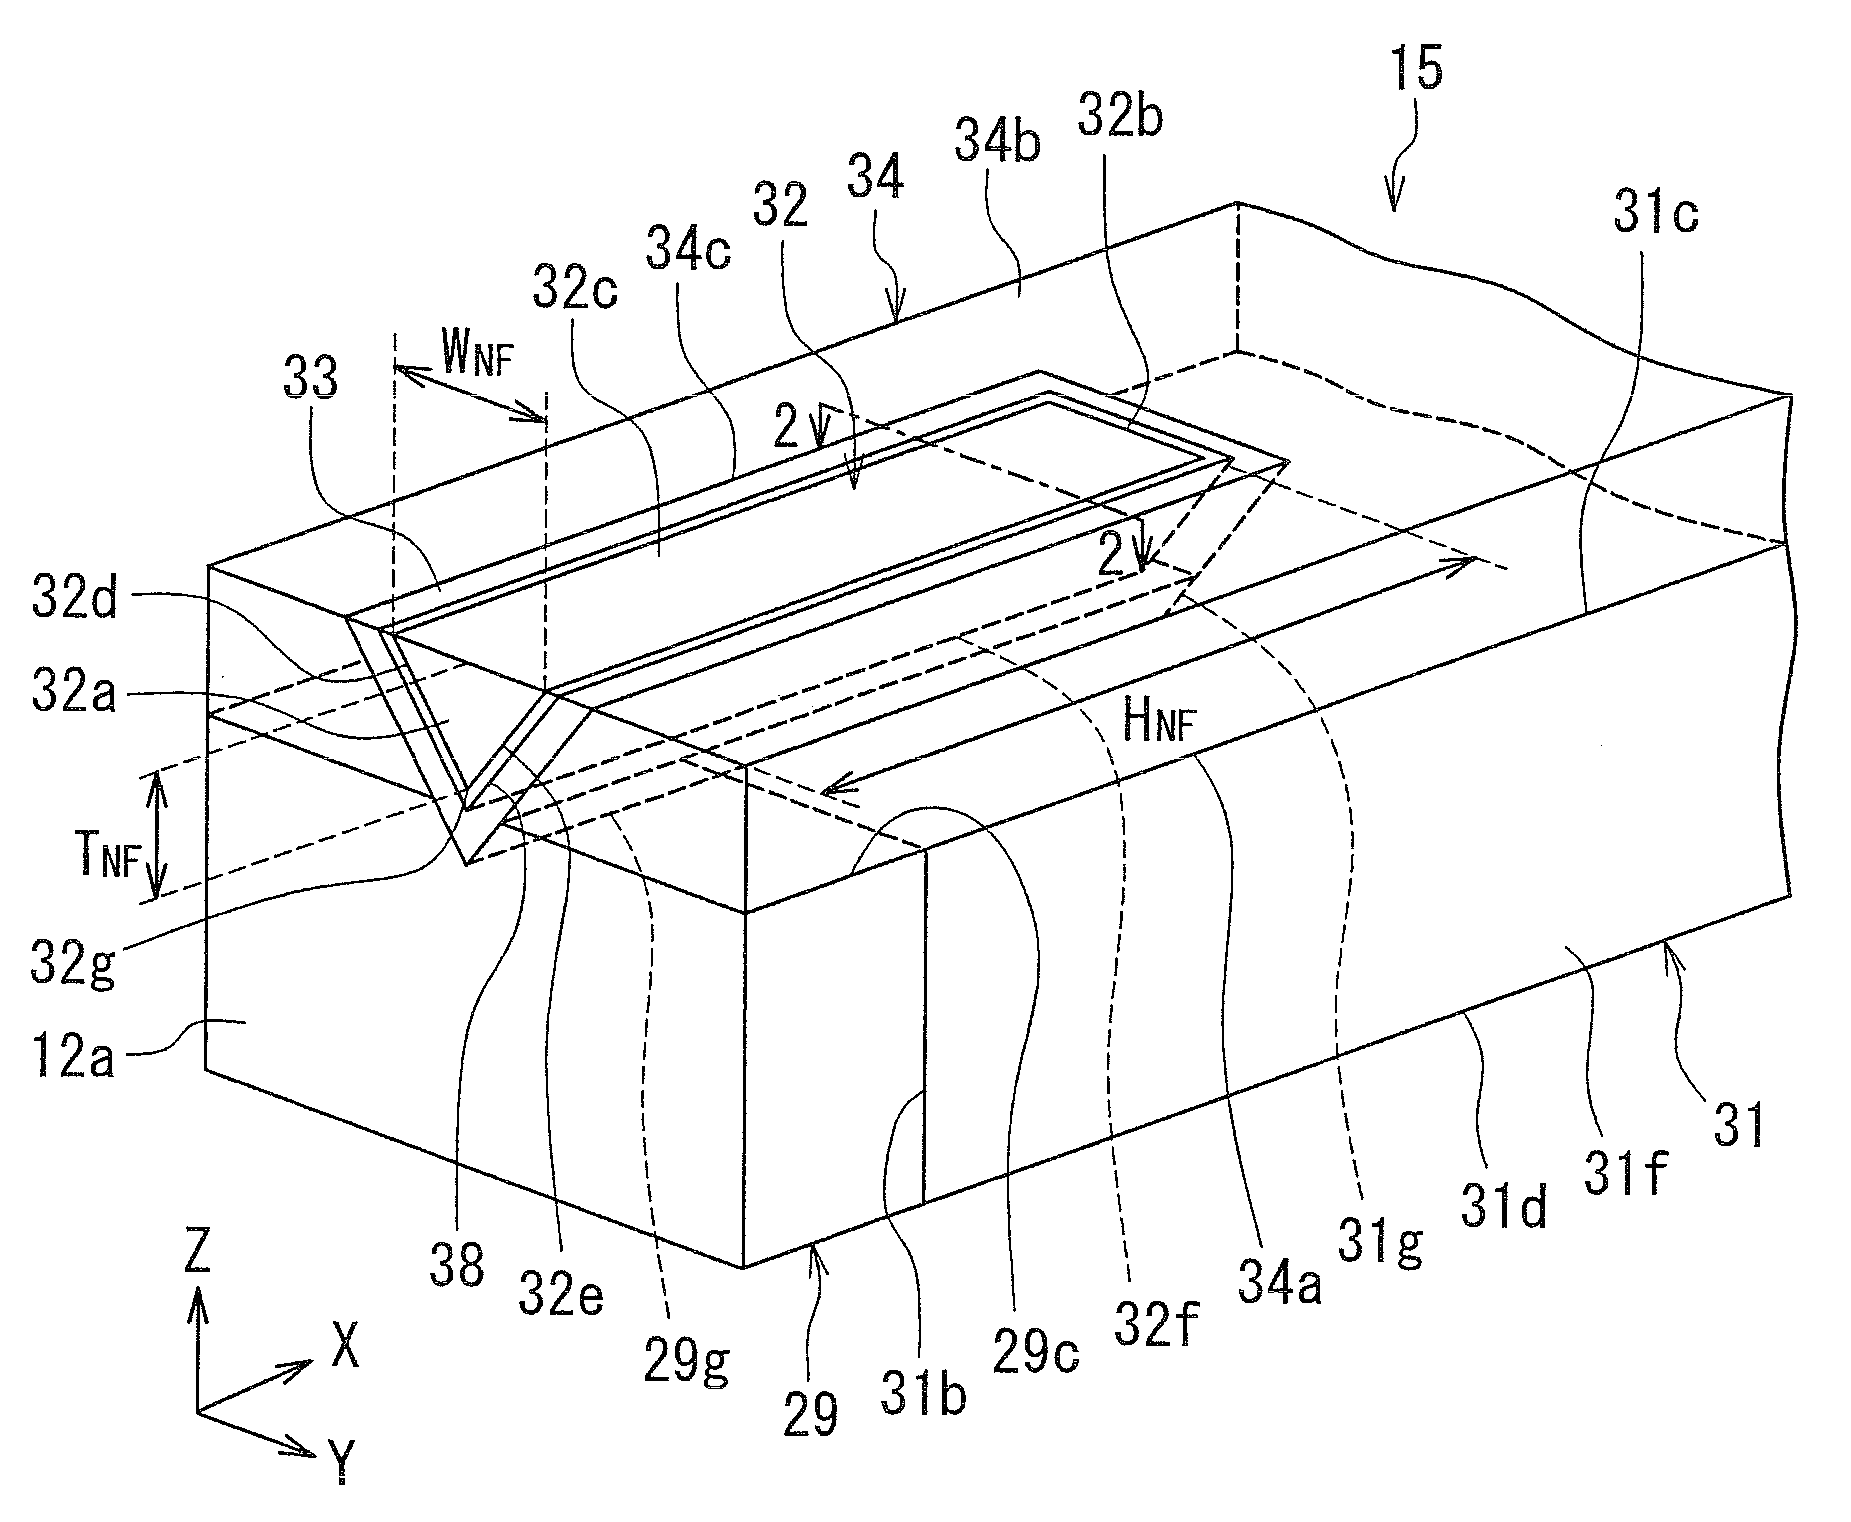 Near-field light generating device including near-field light generating element disposed over waveguide with buffer layer and adhesion layer therebetween